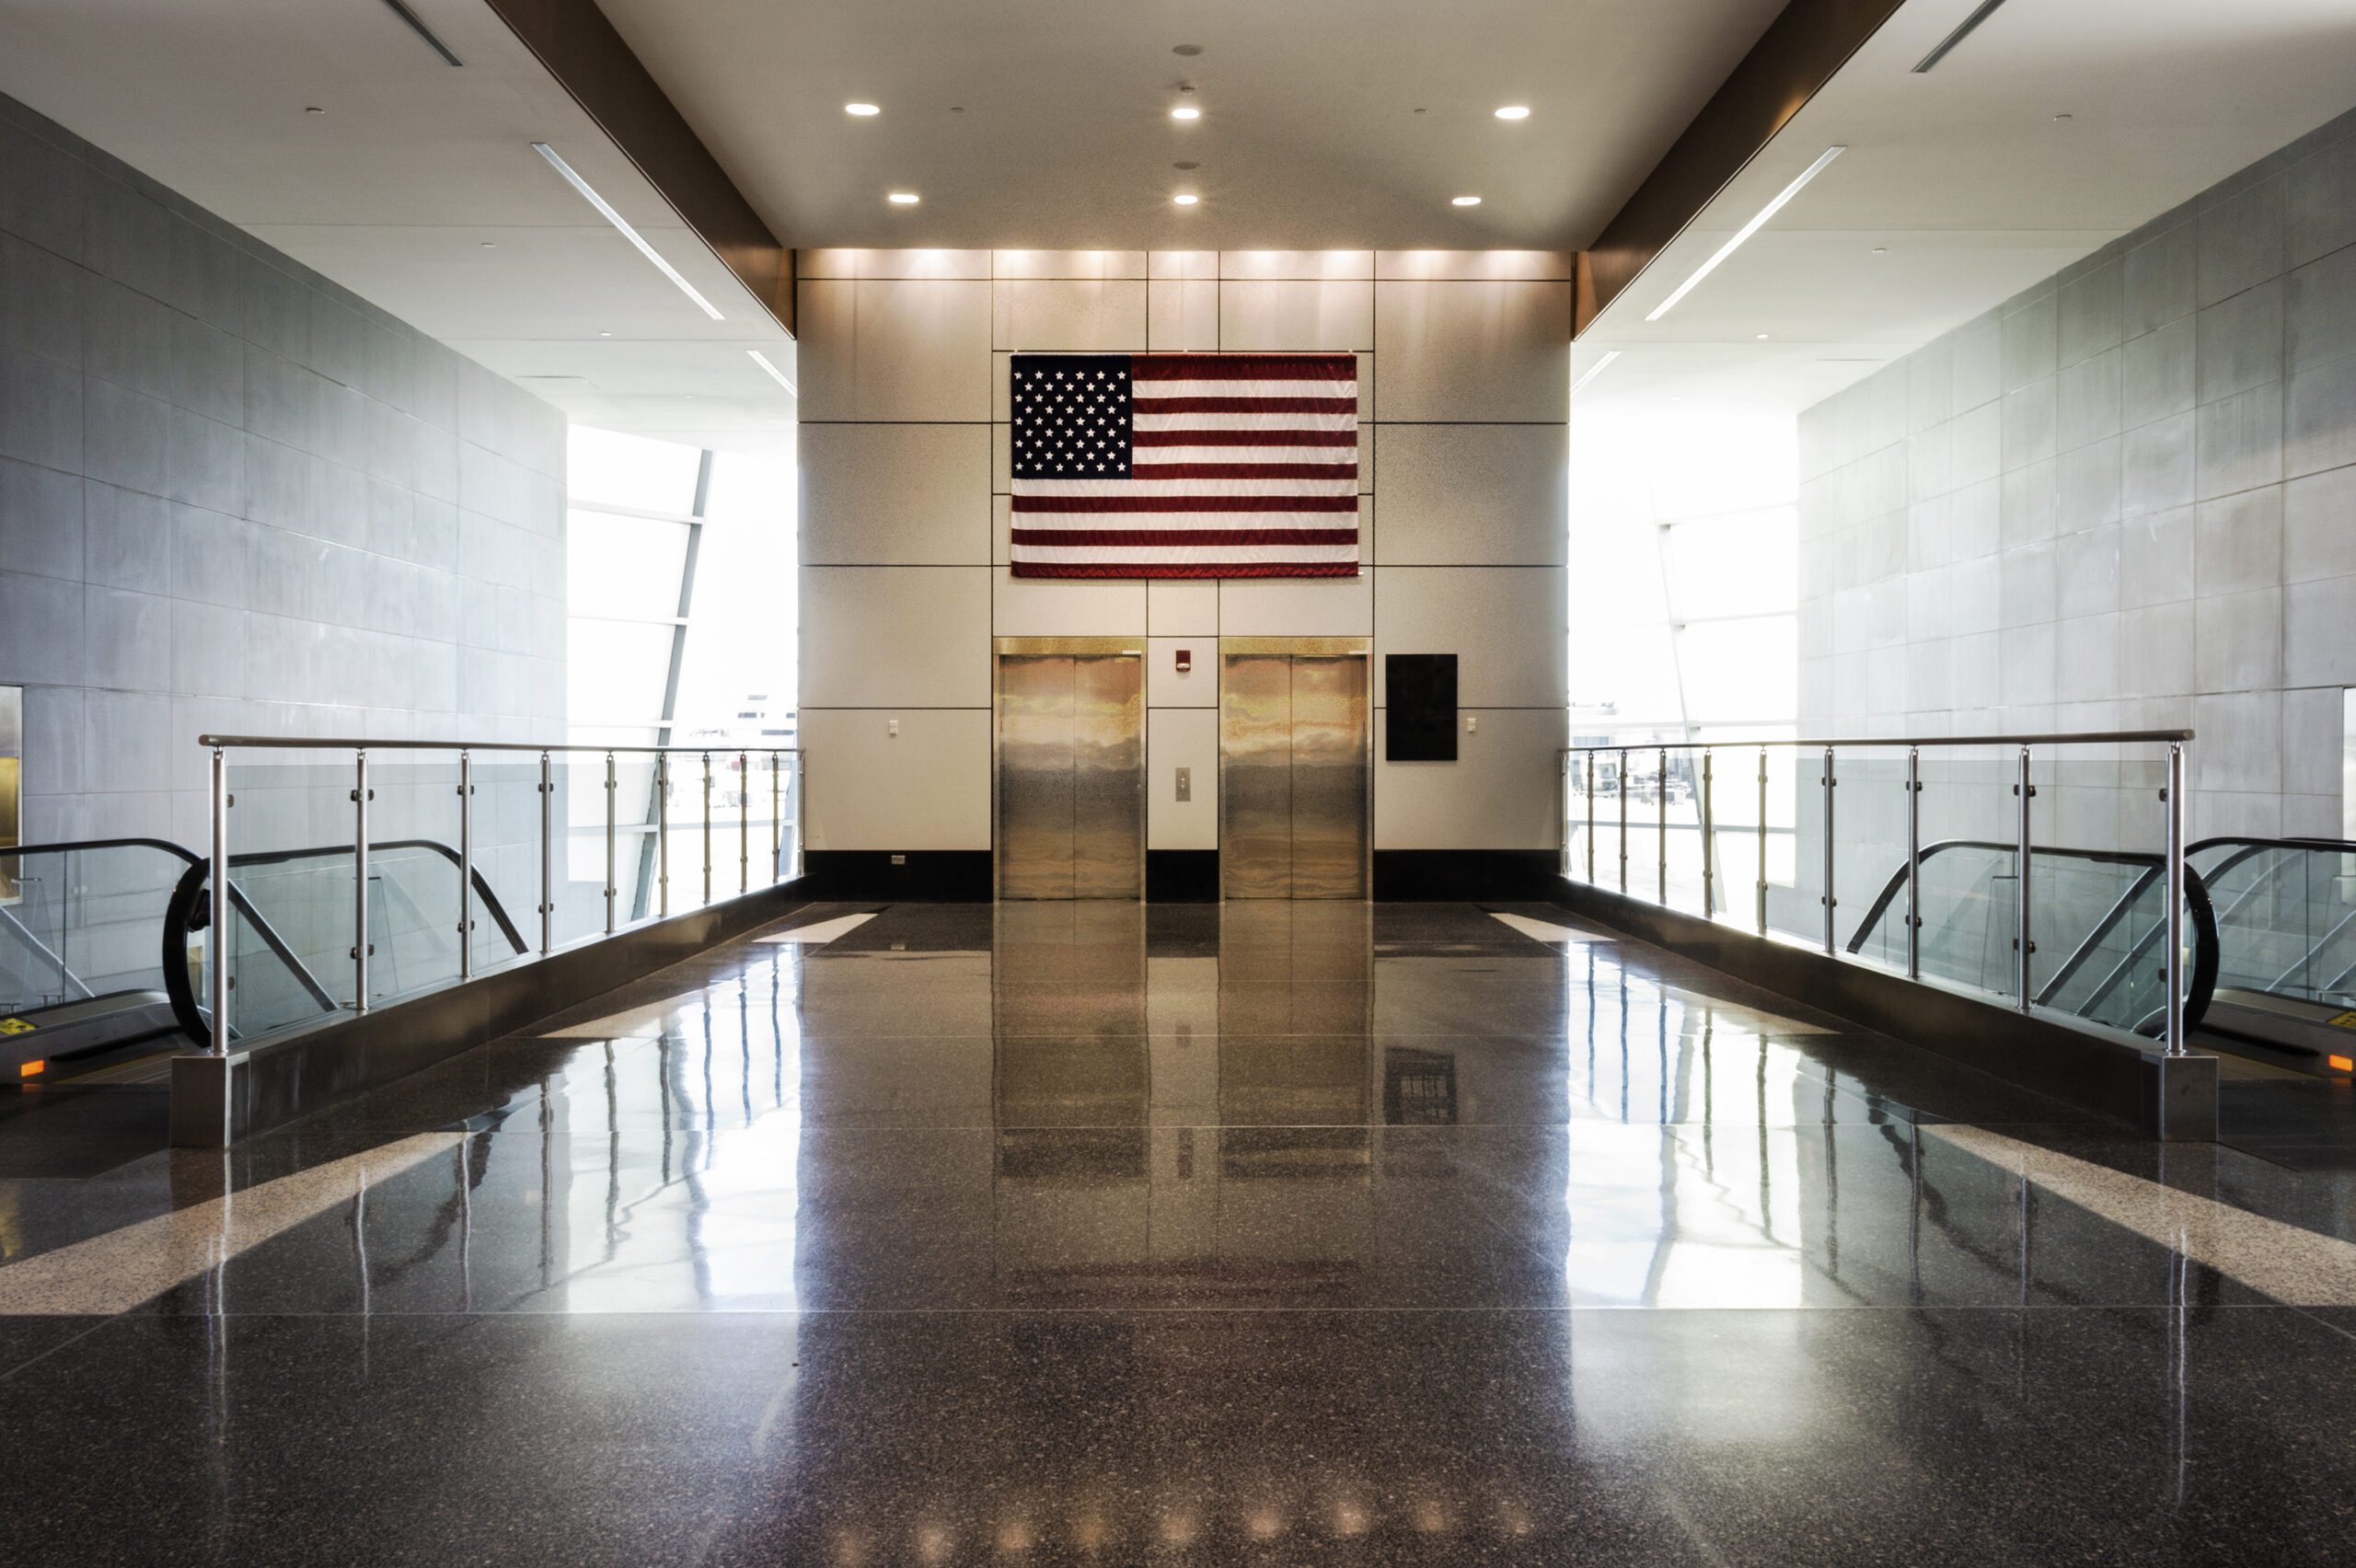 Interior of office building with an American flag over the entrance of two elevators